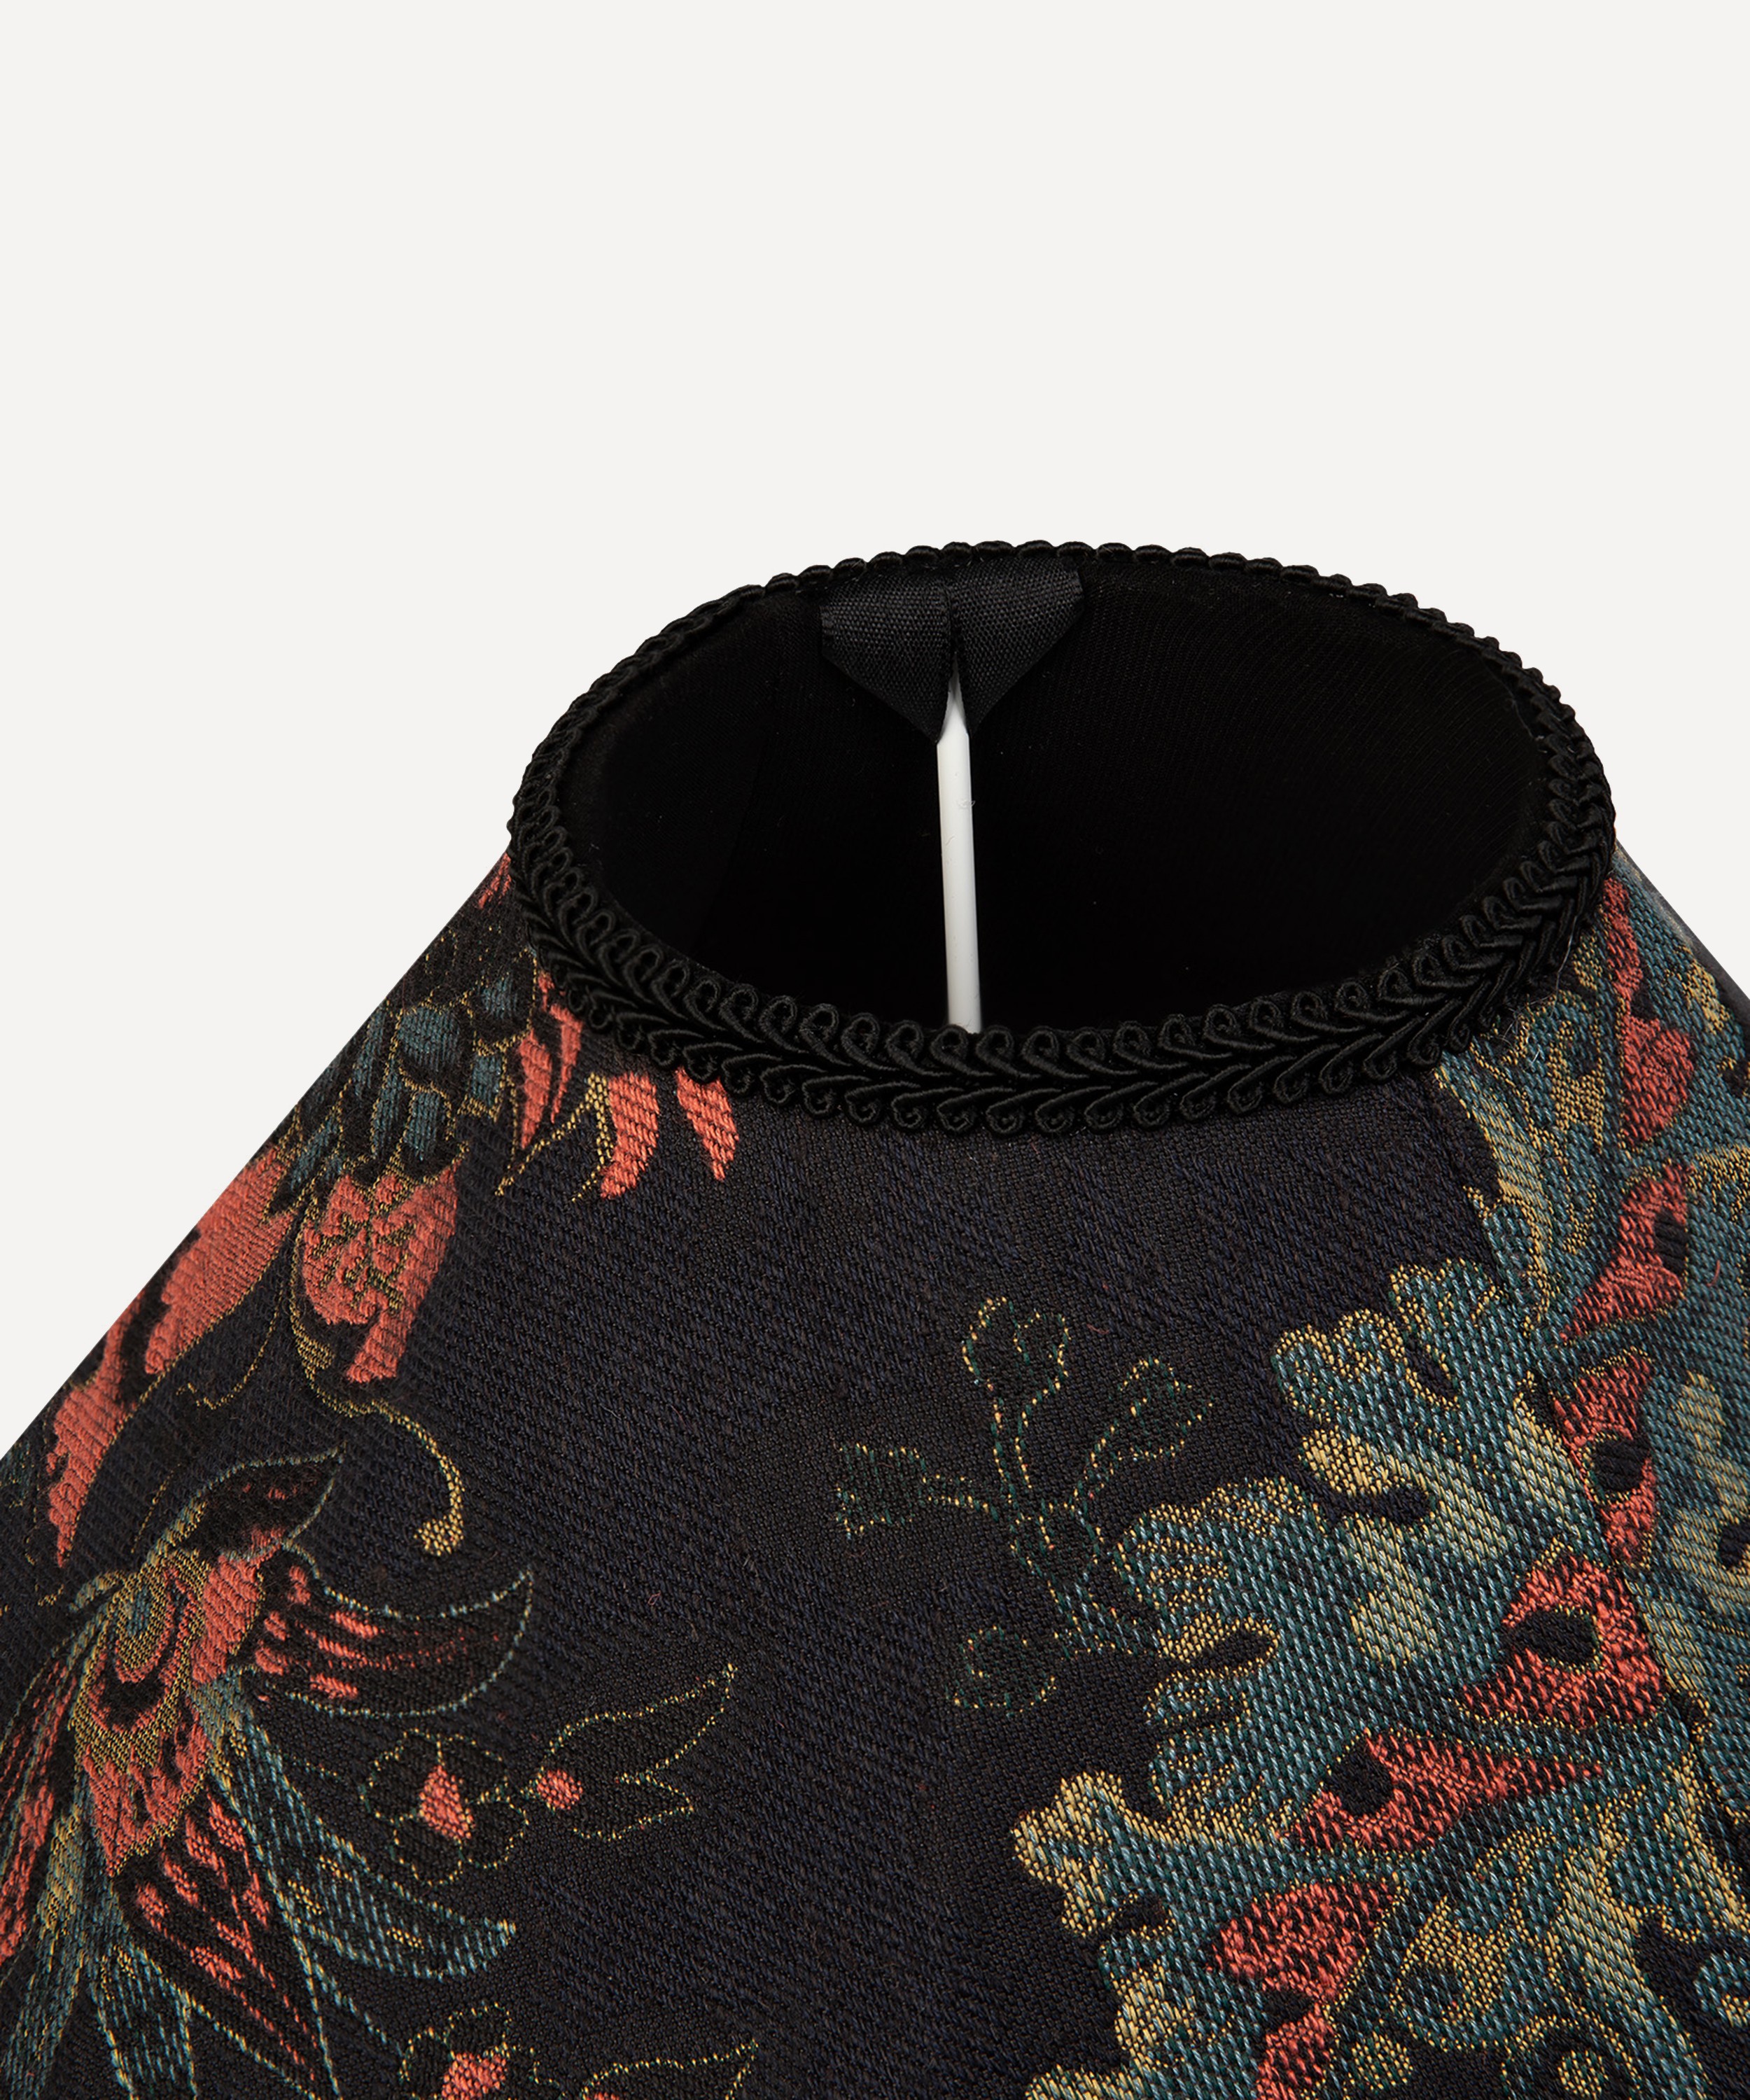 House of Hackney - Persephone Jacquard Romily Lampshade image number 1